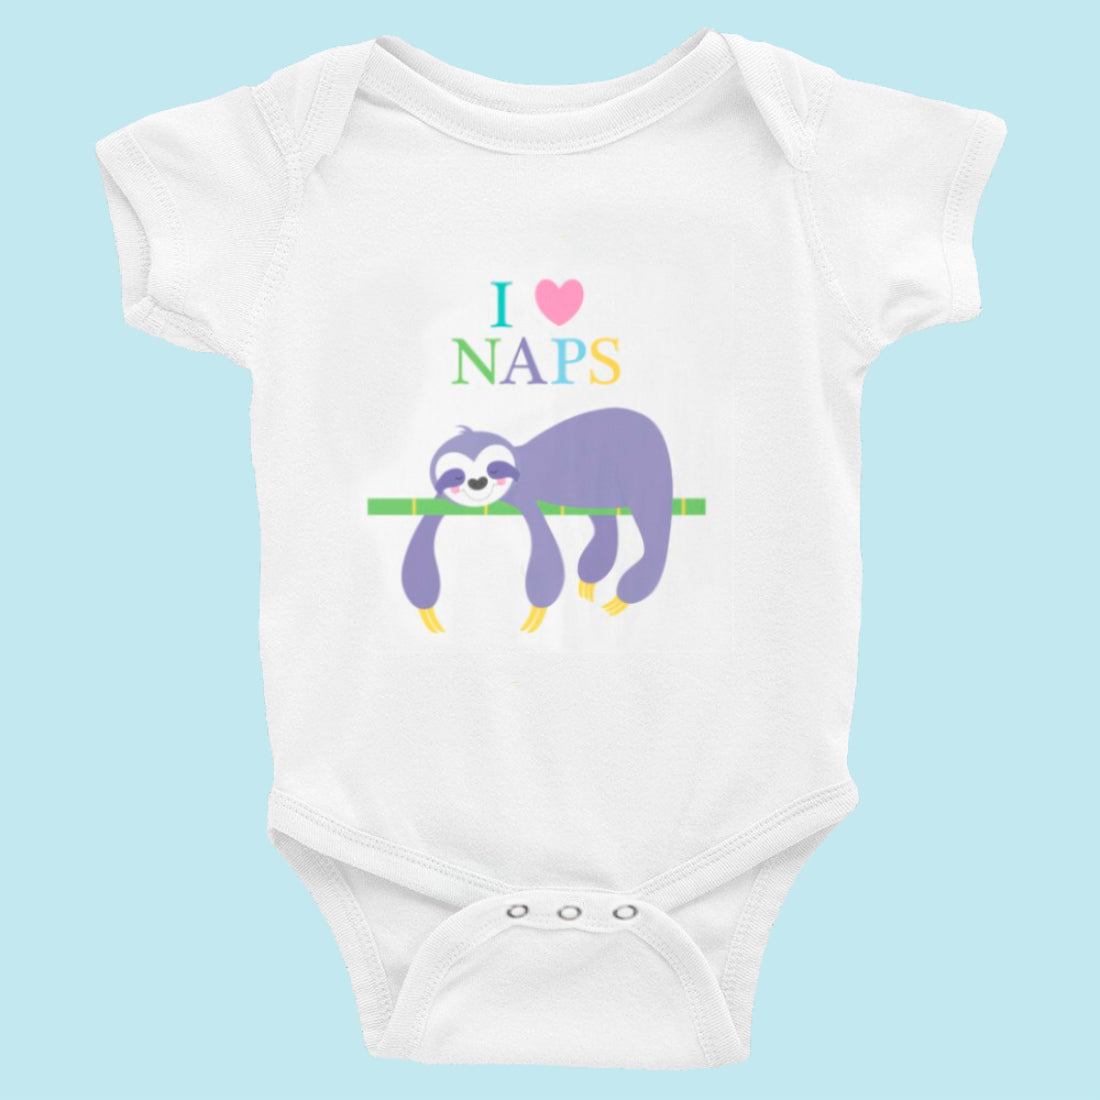 comfortable white baby bodysuit with a cute sleeping sloth design